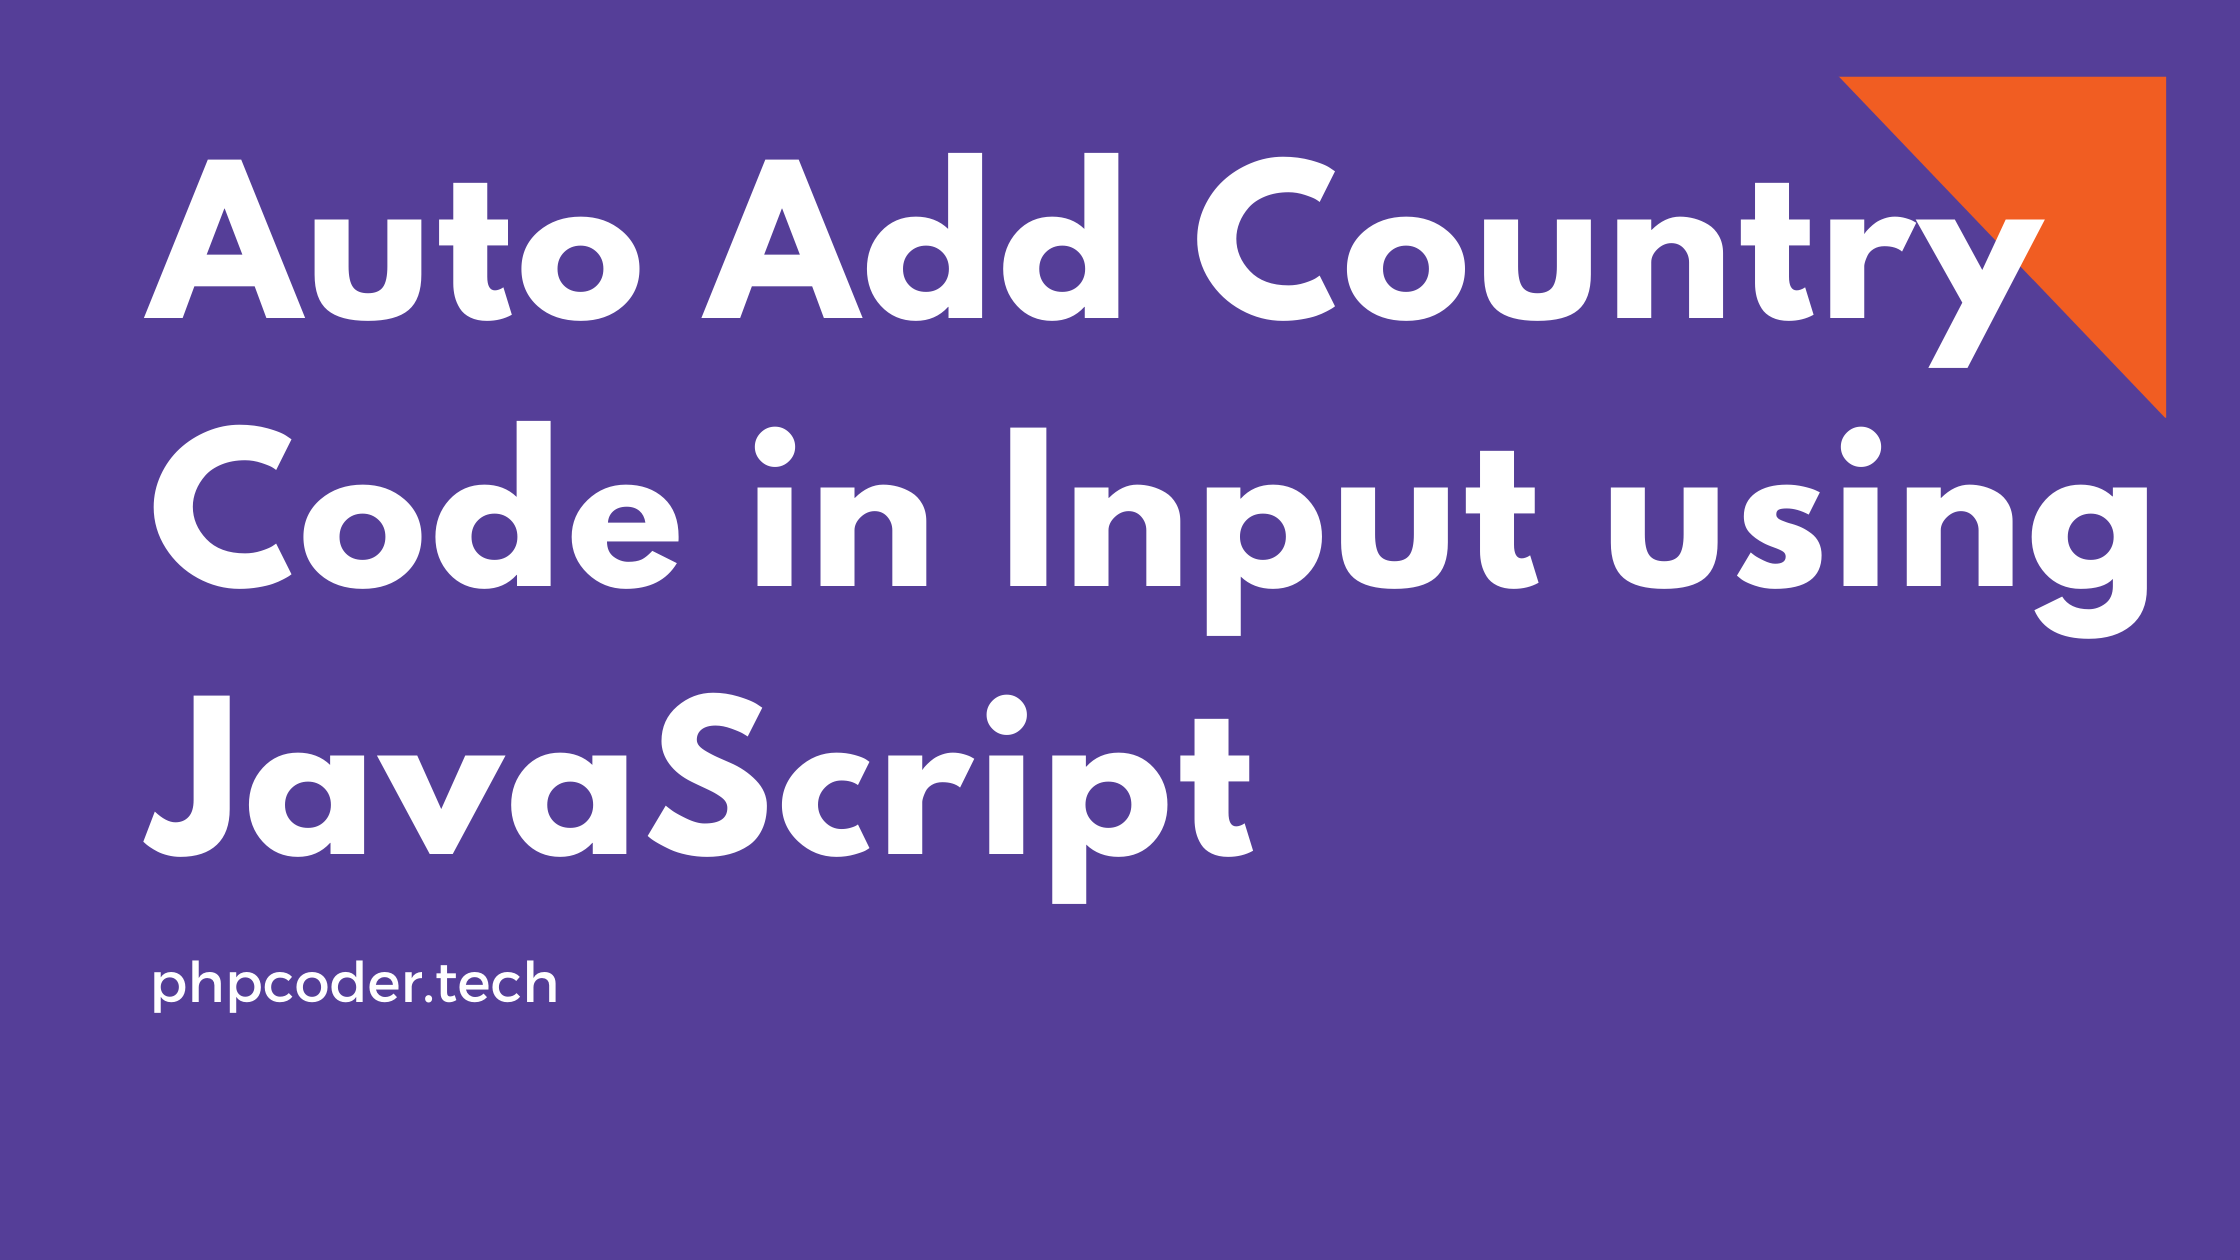 Auto Add Country Code in Input using JavaScript